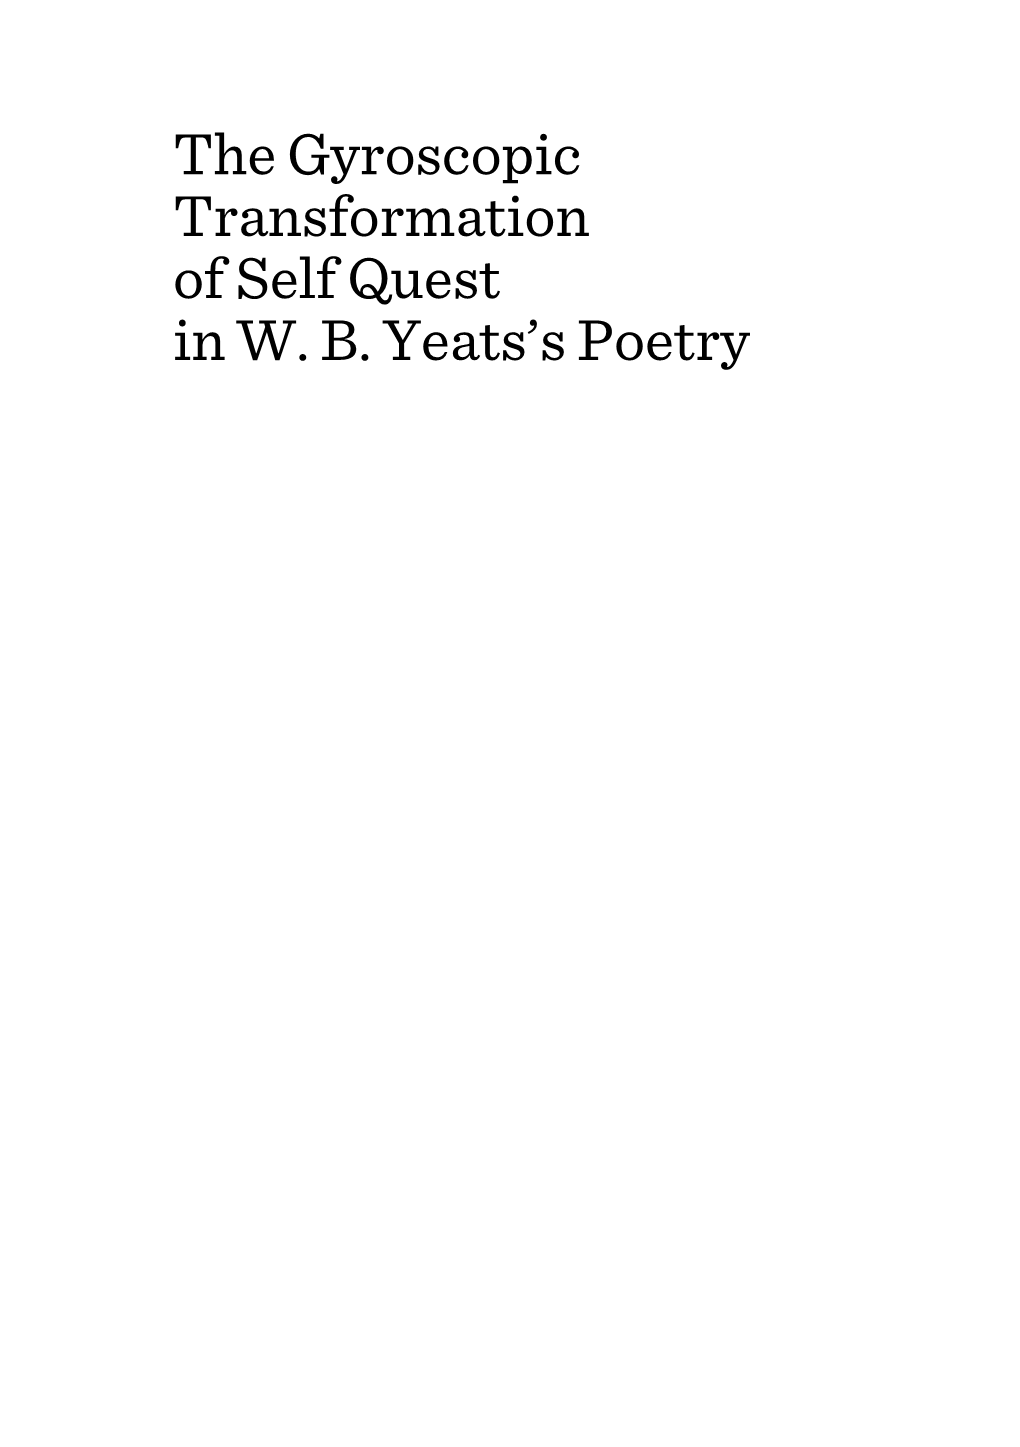 The Gyroscopic Transformation of Self Quest in W. B. Yeats's Poetry